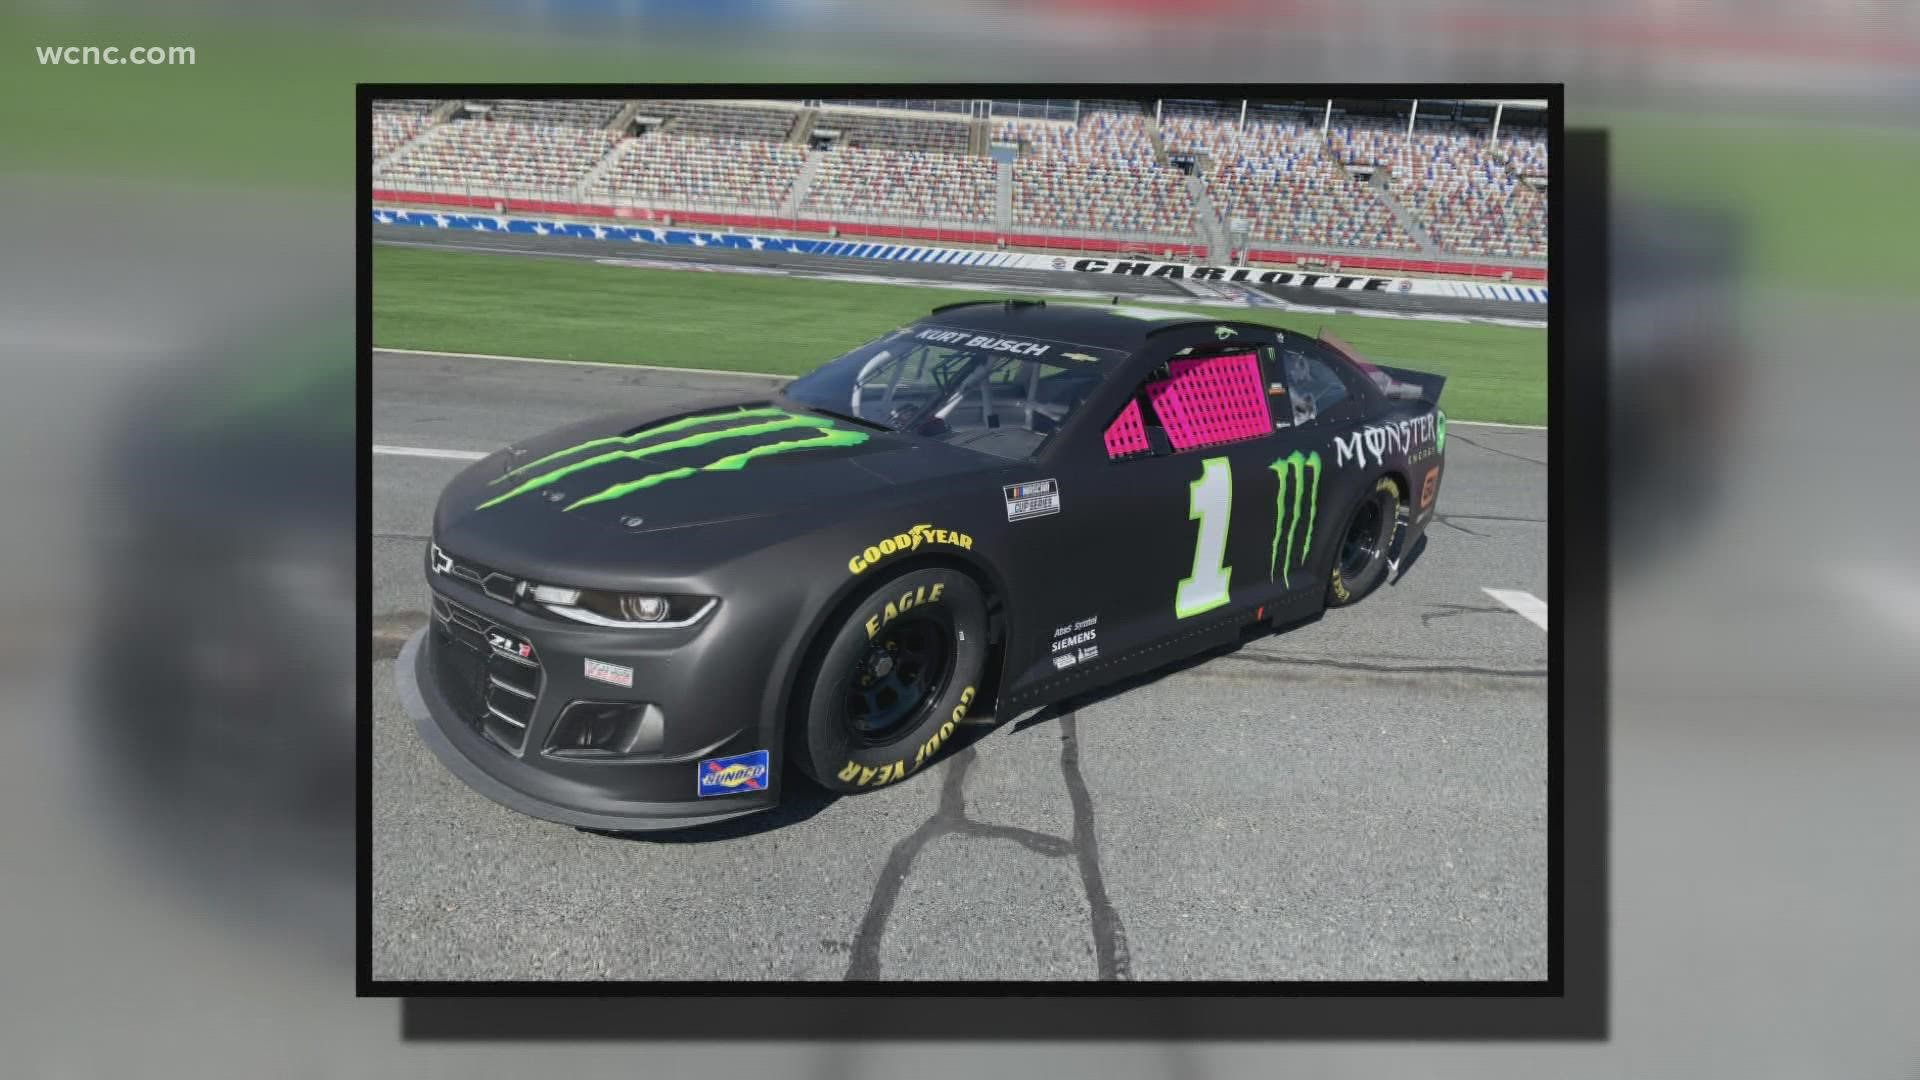 Veteran NASCAR driver Kurt Busch's No. 1 Chevrolet will have pink window nets for the race, dubbed "Windows of Hope," after he received a letter from a young fan.